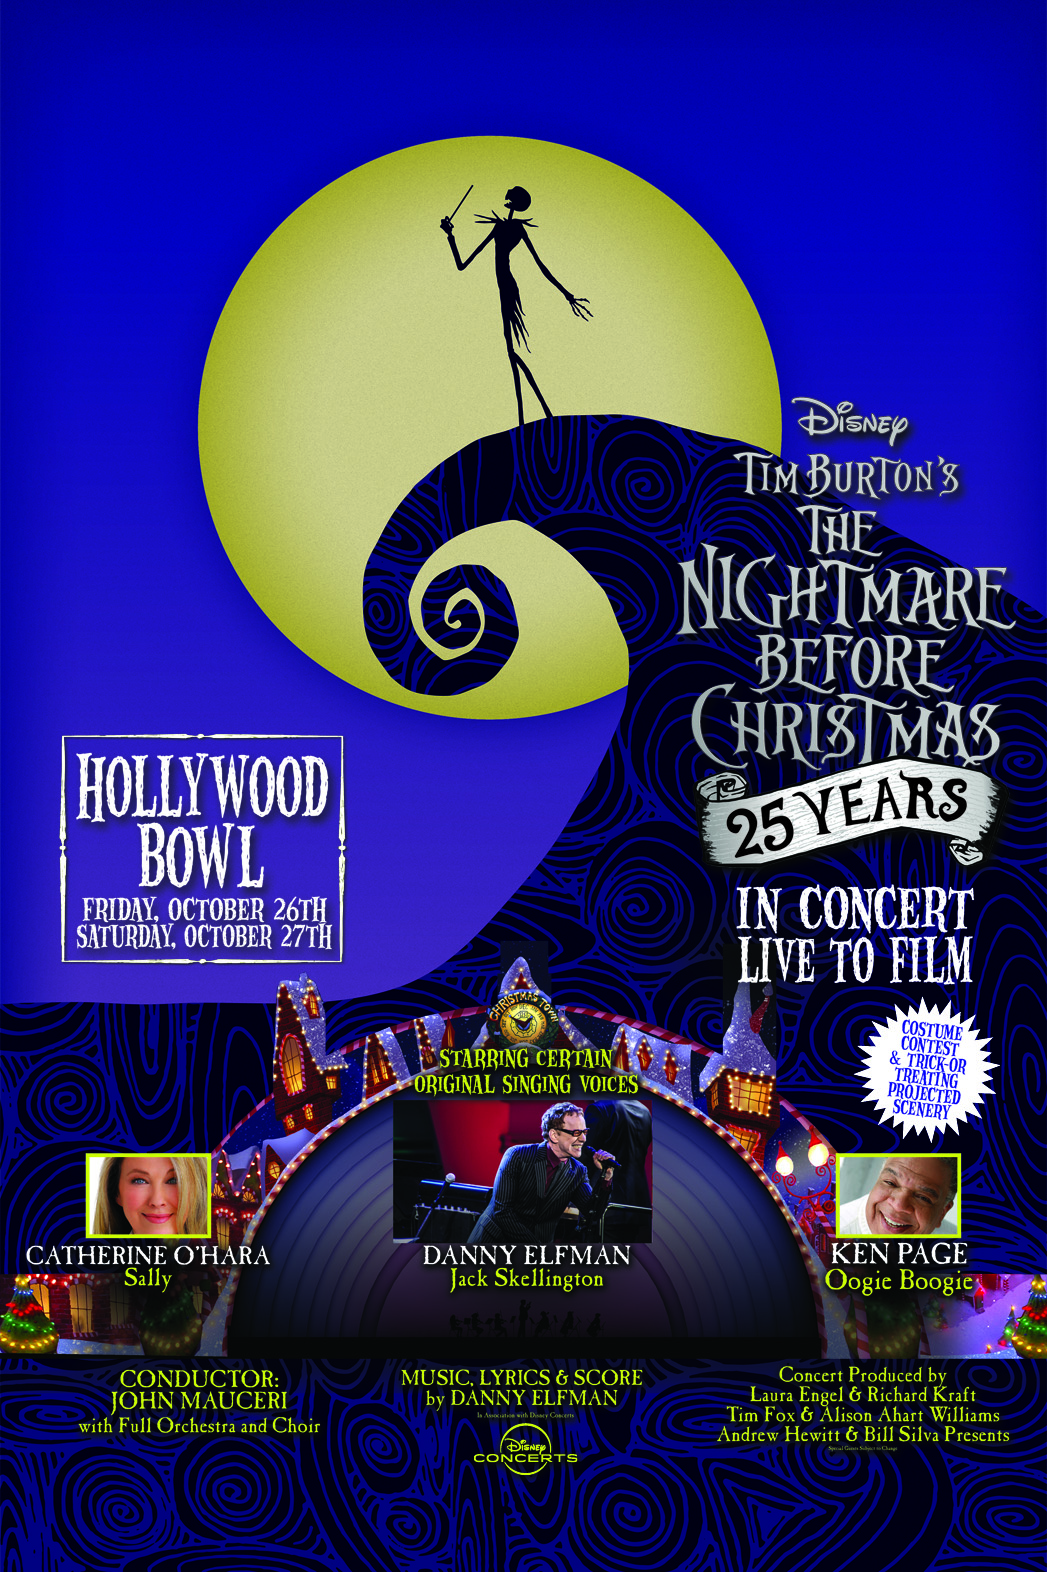 nightmare before christmas hollywood bowl 2020 The Nightmare Before Christmas Getting 25th Anniversary Concert At Hollywood Bowl Celebrityaccess nightmare before christmas hollywood bowl 2020